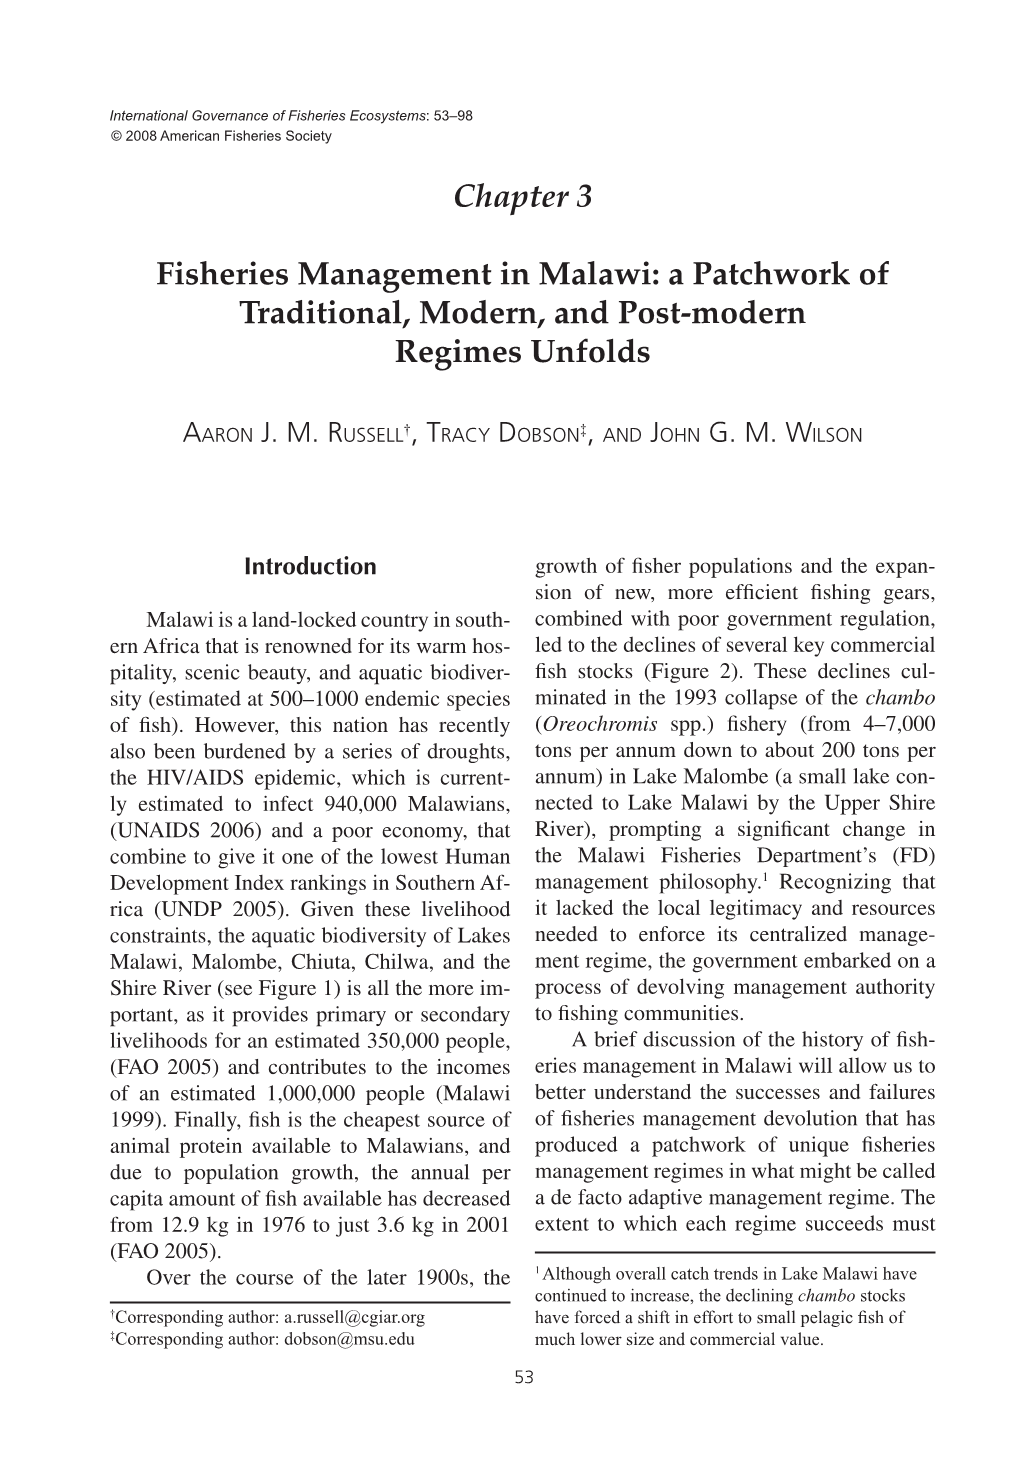 Chapter 3 Fisheries Management in Malawi